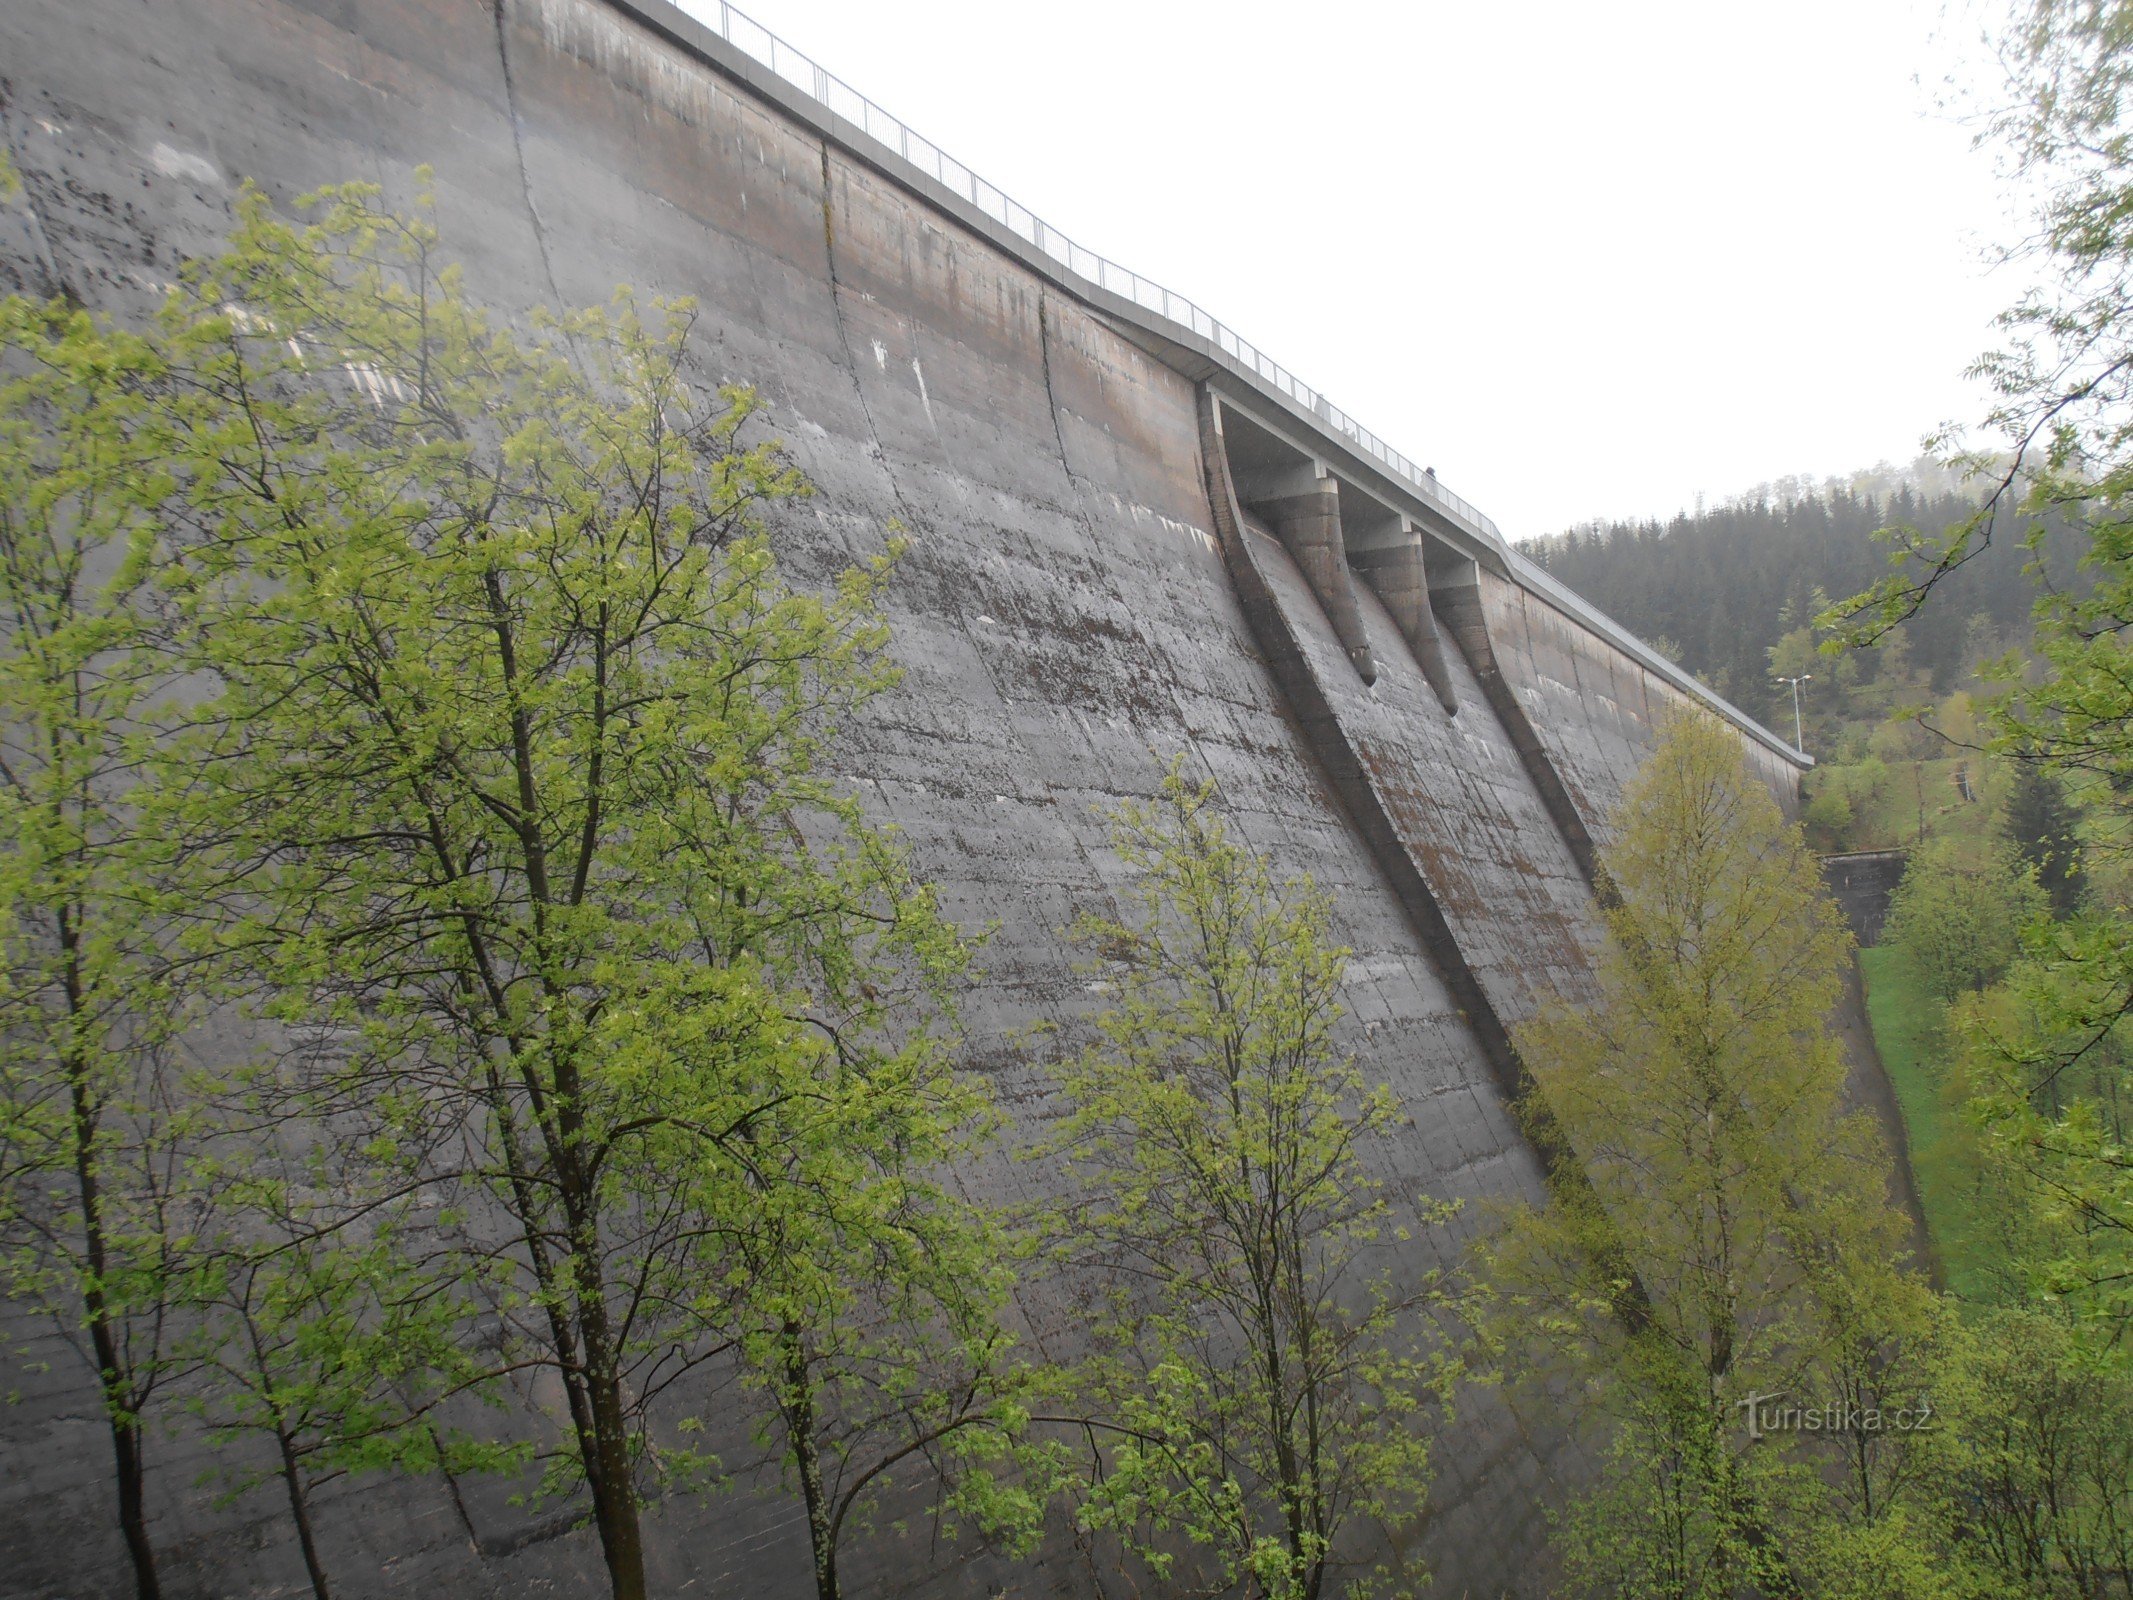 The dam of the Flaje valley reservoir